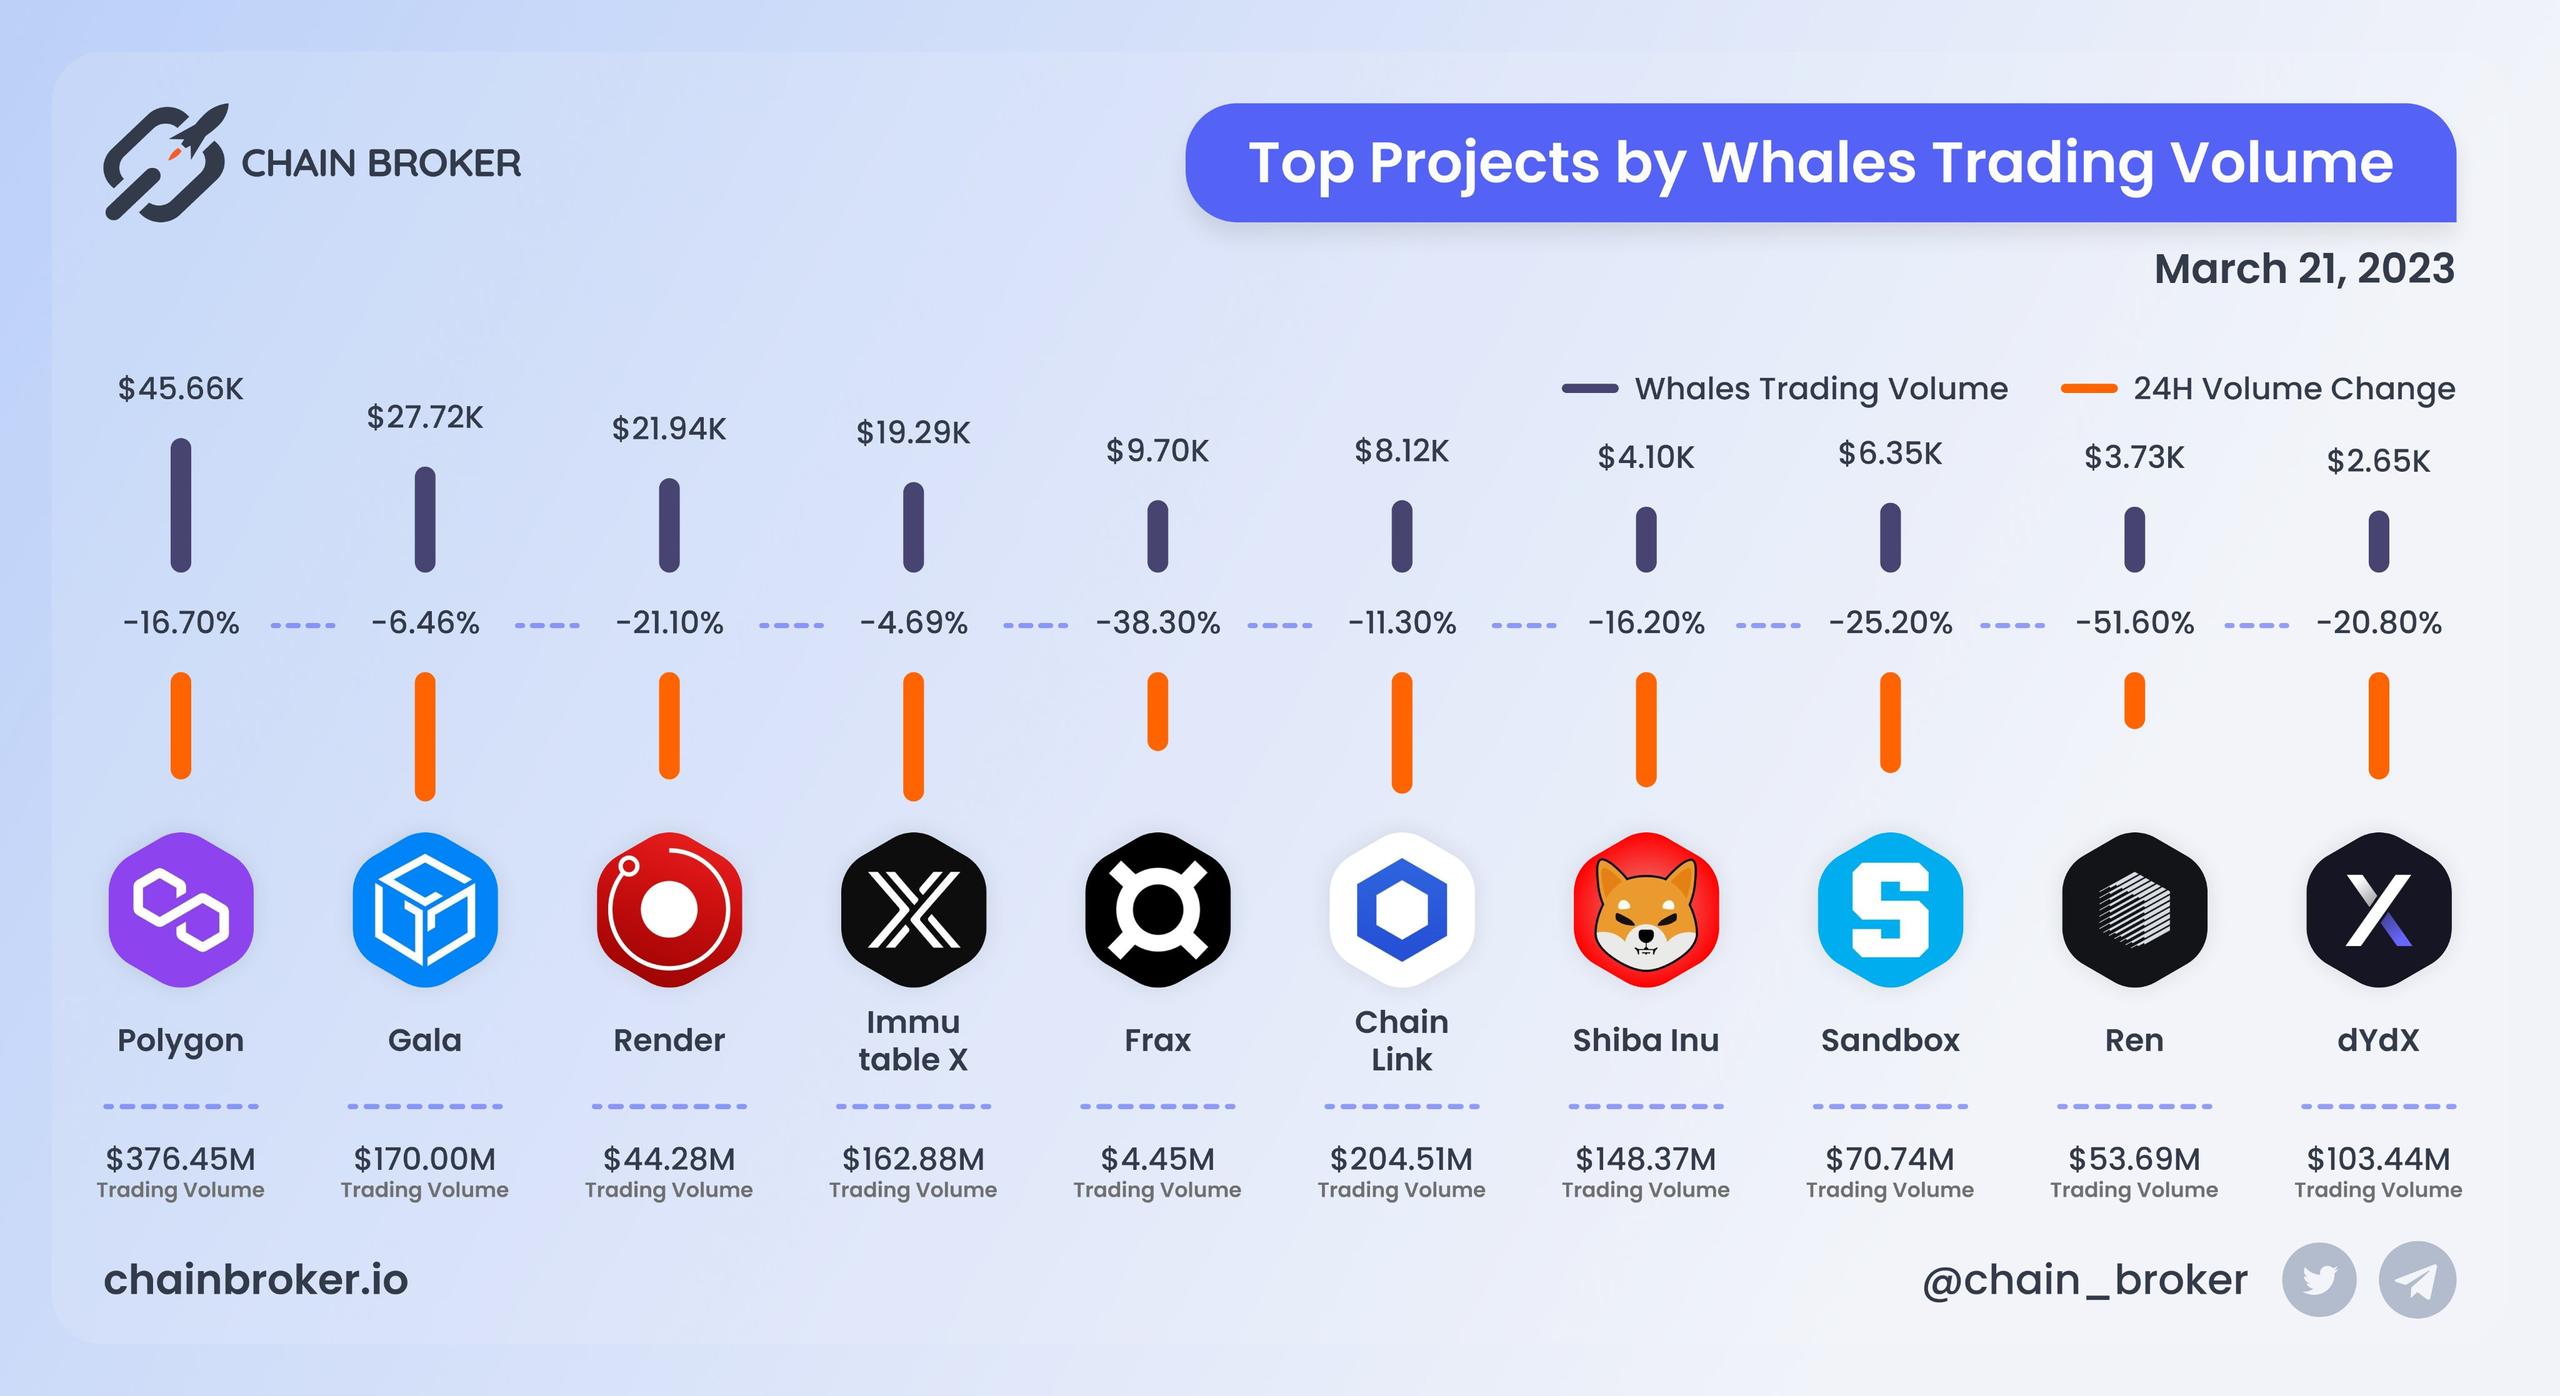 Top projects by whale trading volume